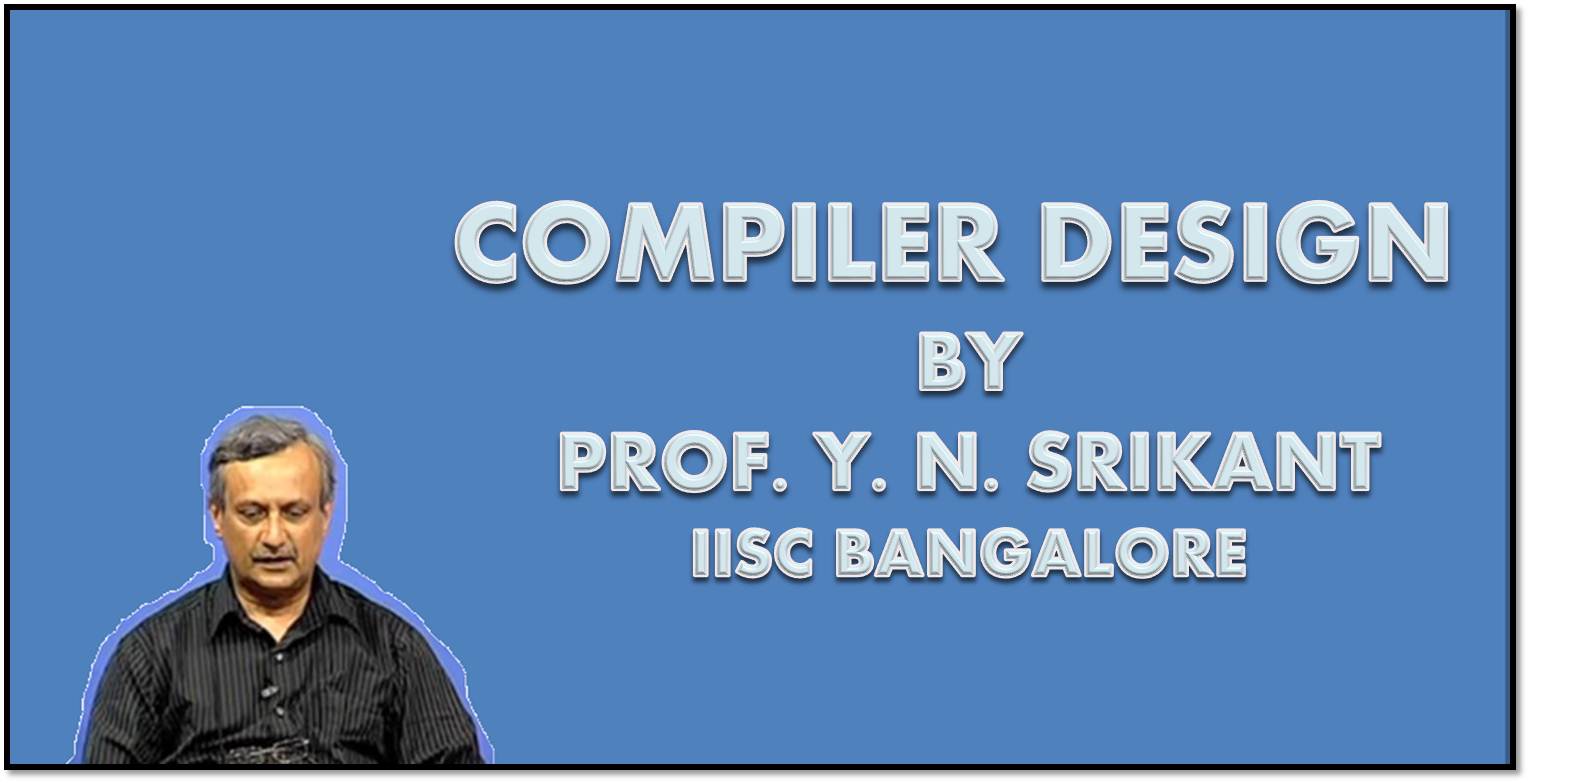 http://study.aisectonline.com/images/SubCategory/Video lecture series on Compiler Design by Prof. Y.N.Srikant, IISC Bangalore.jpg